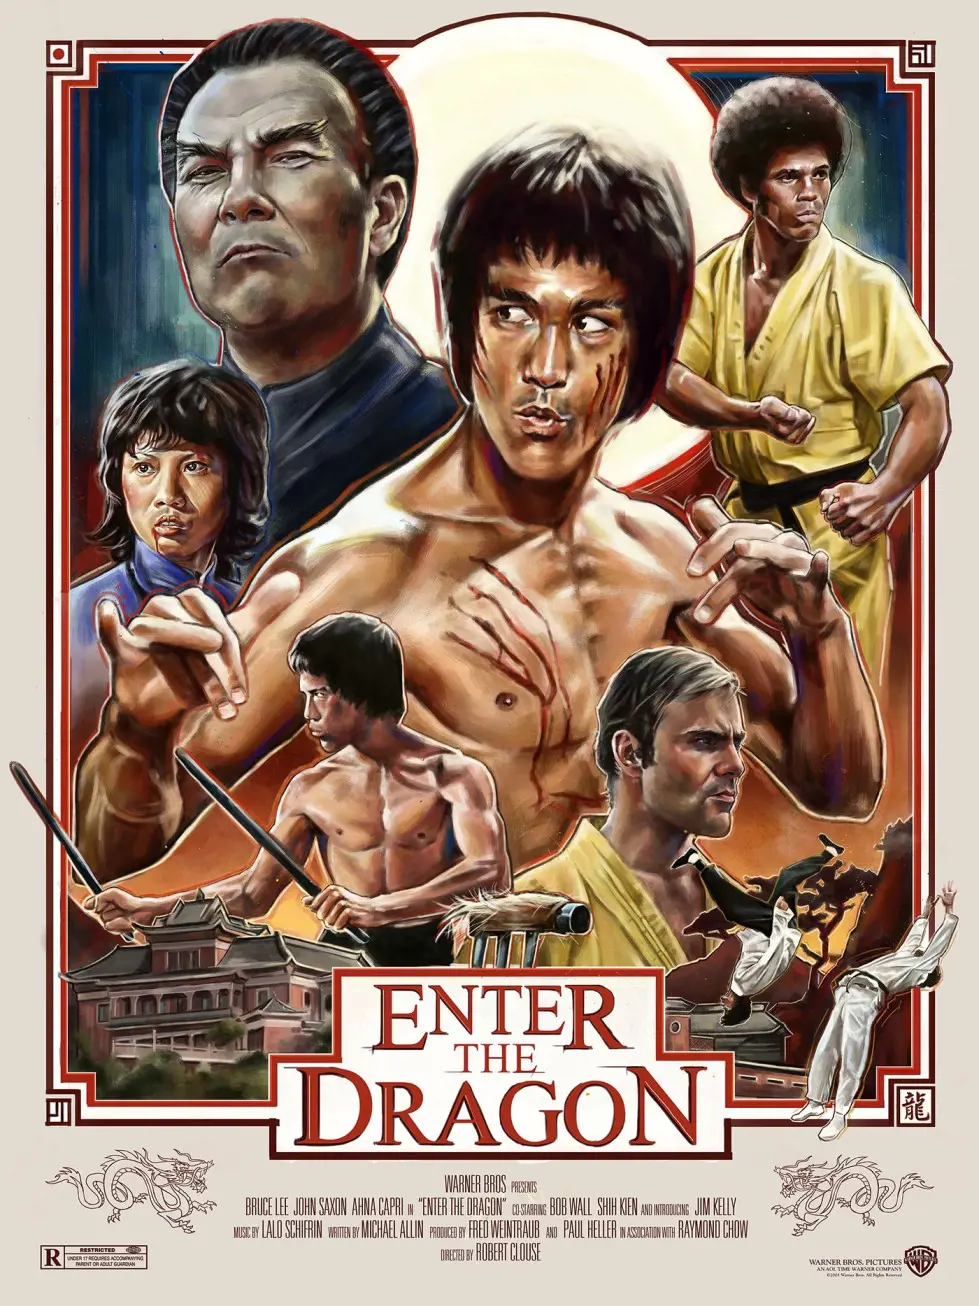 Enter The Dragon is the last film of late actor Bruce Lee